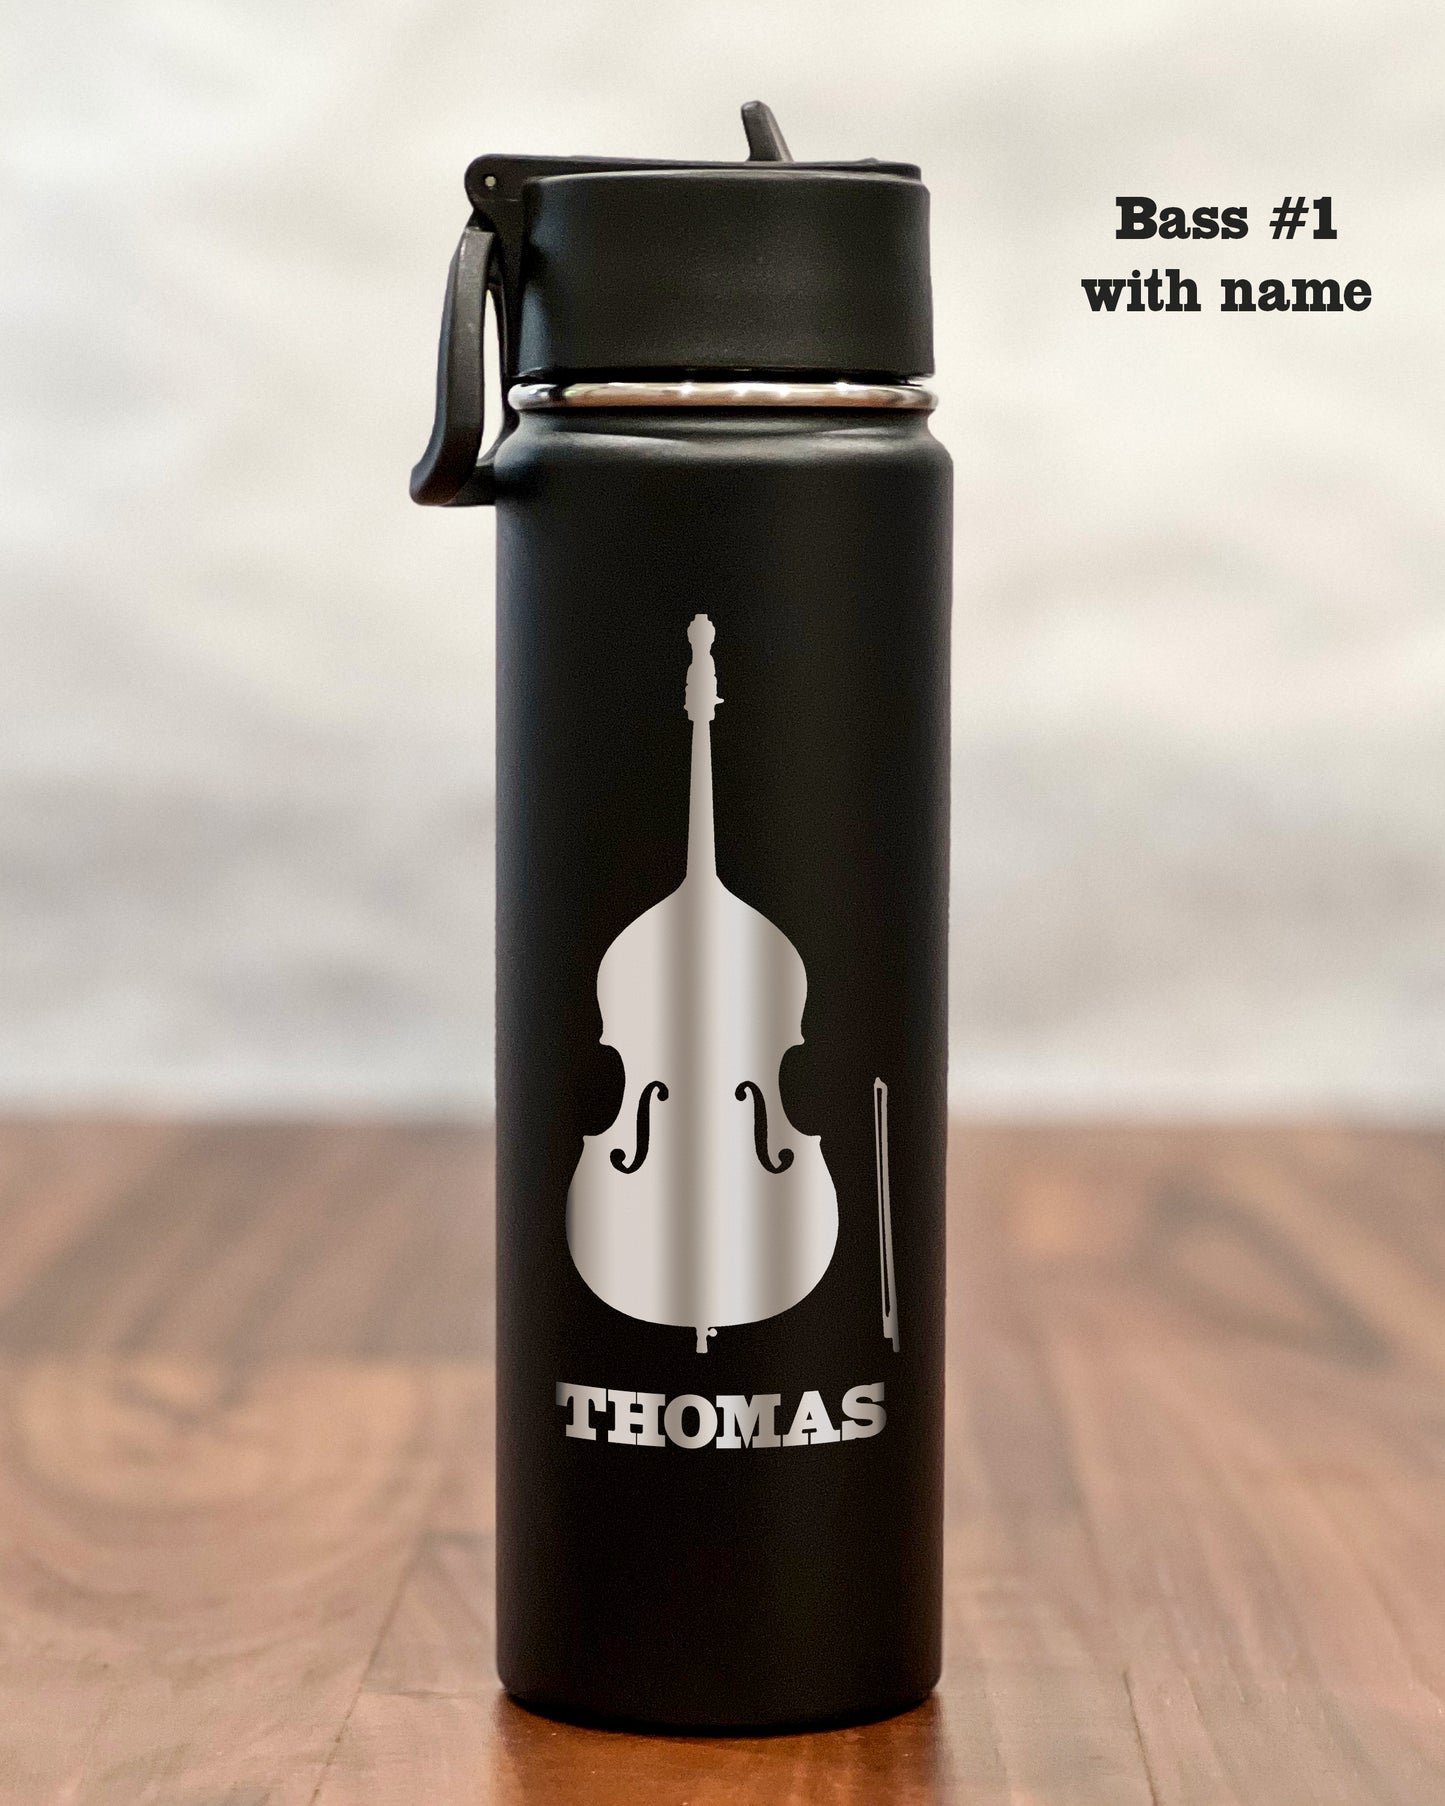 24 ounce Water Bottle with engraved Bass